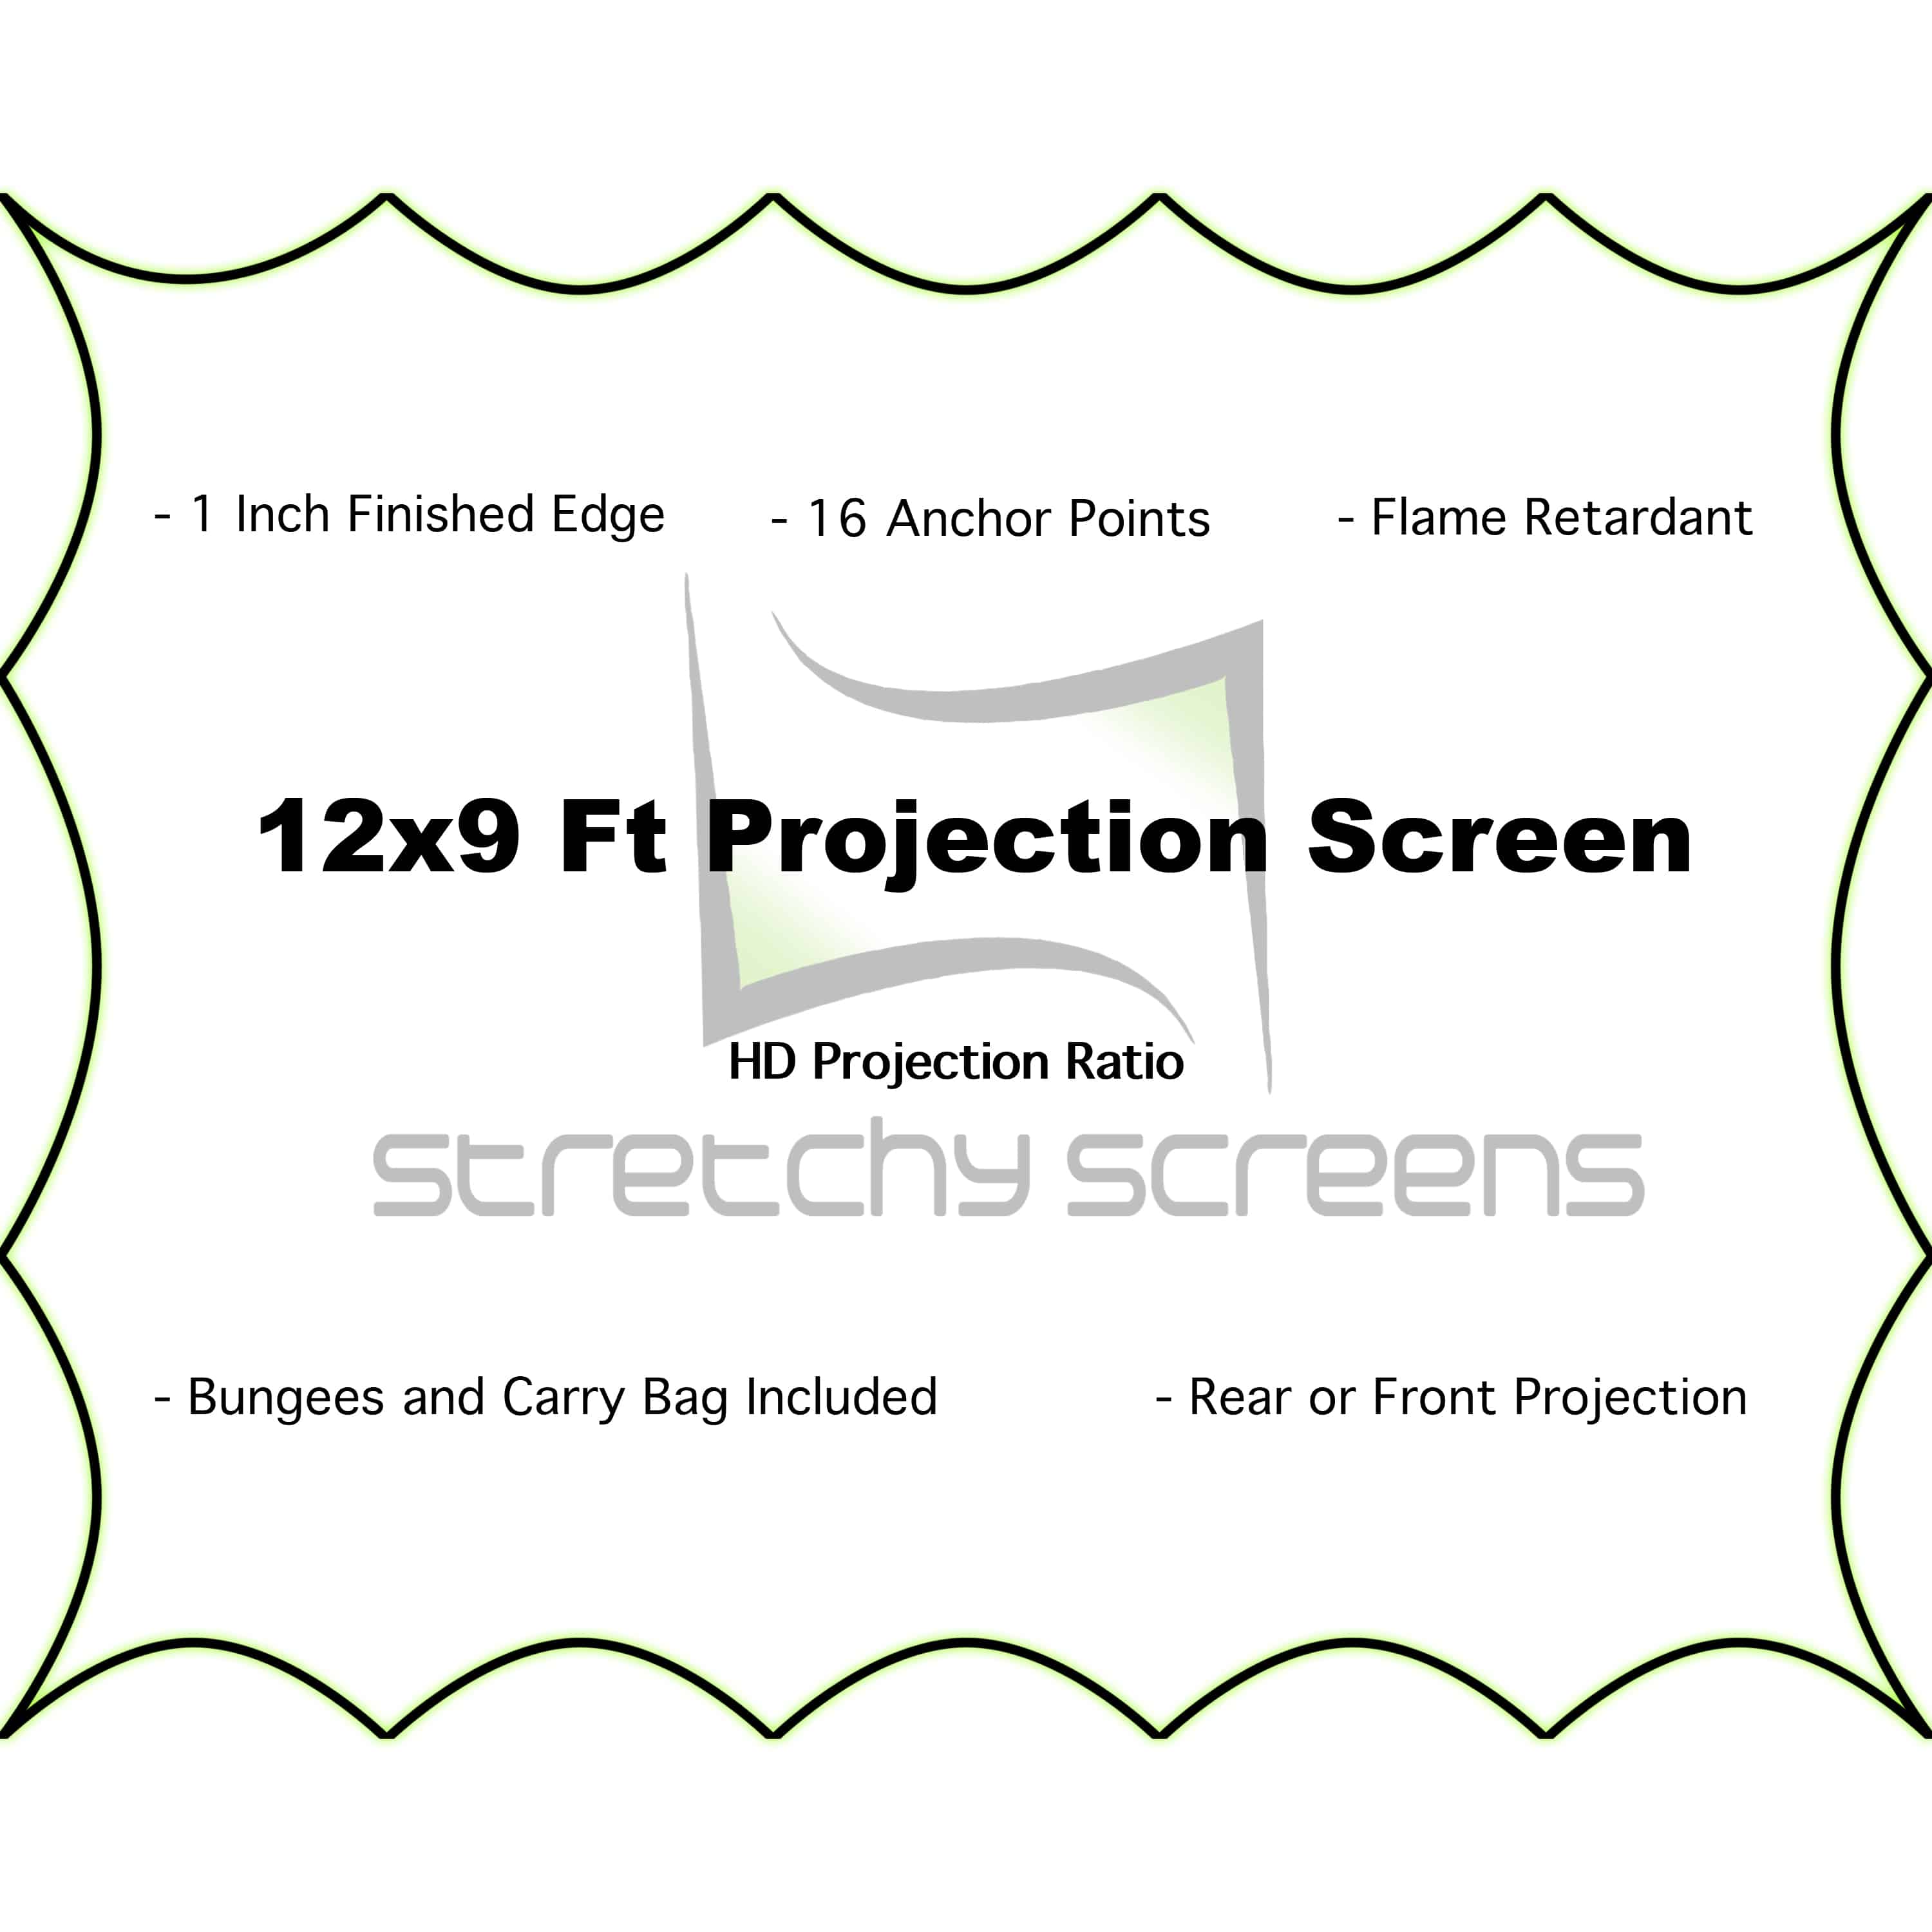 12x9 Ft stretchy screens- stretch projector screen